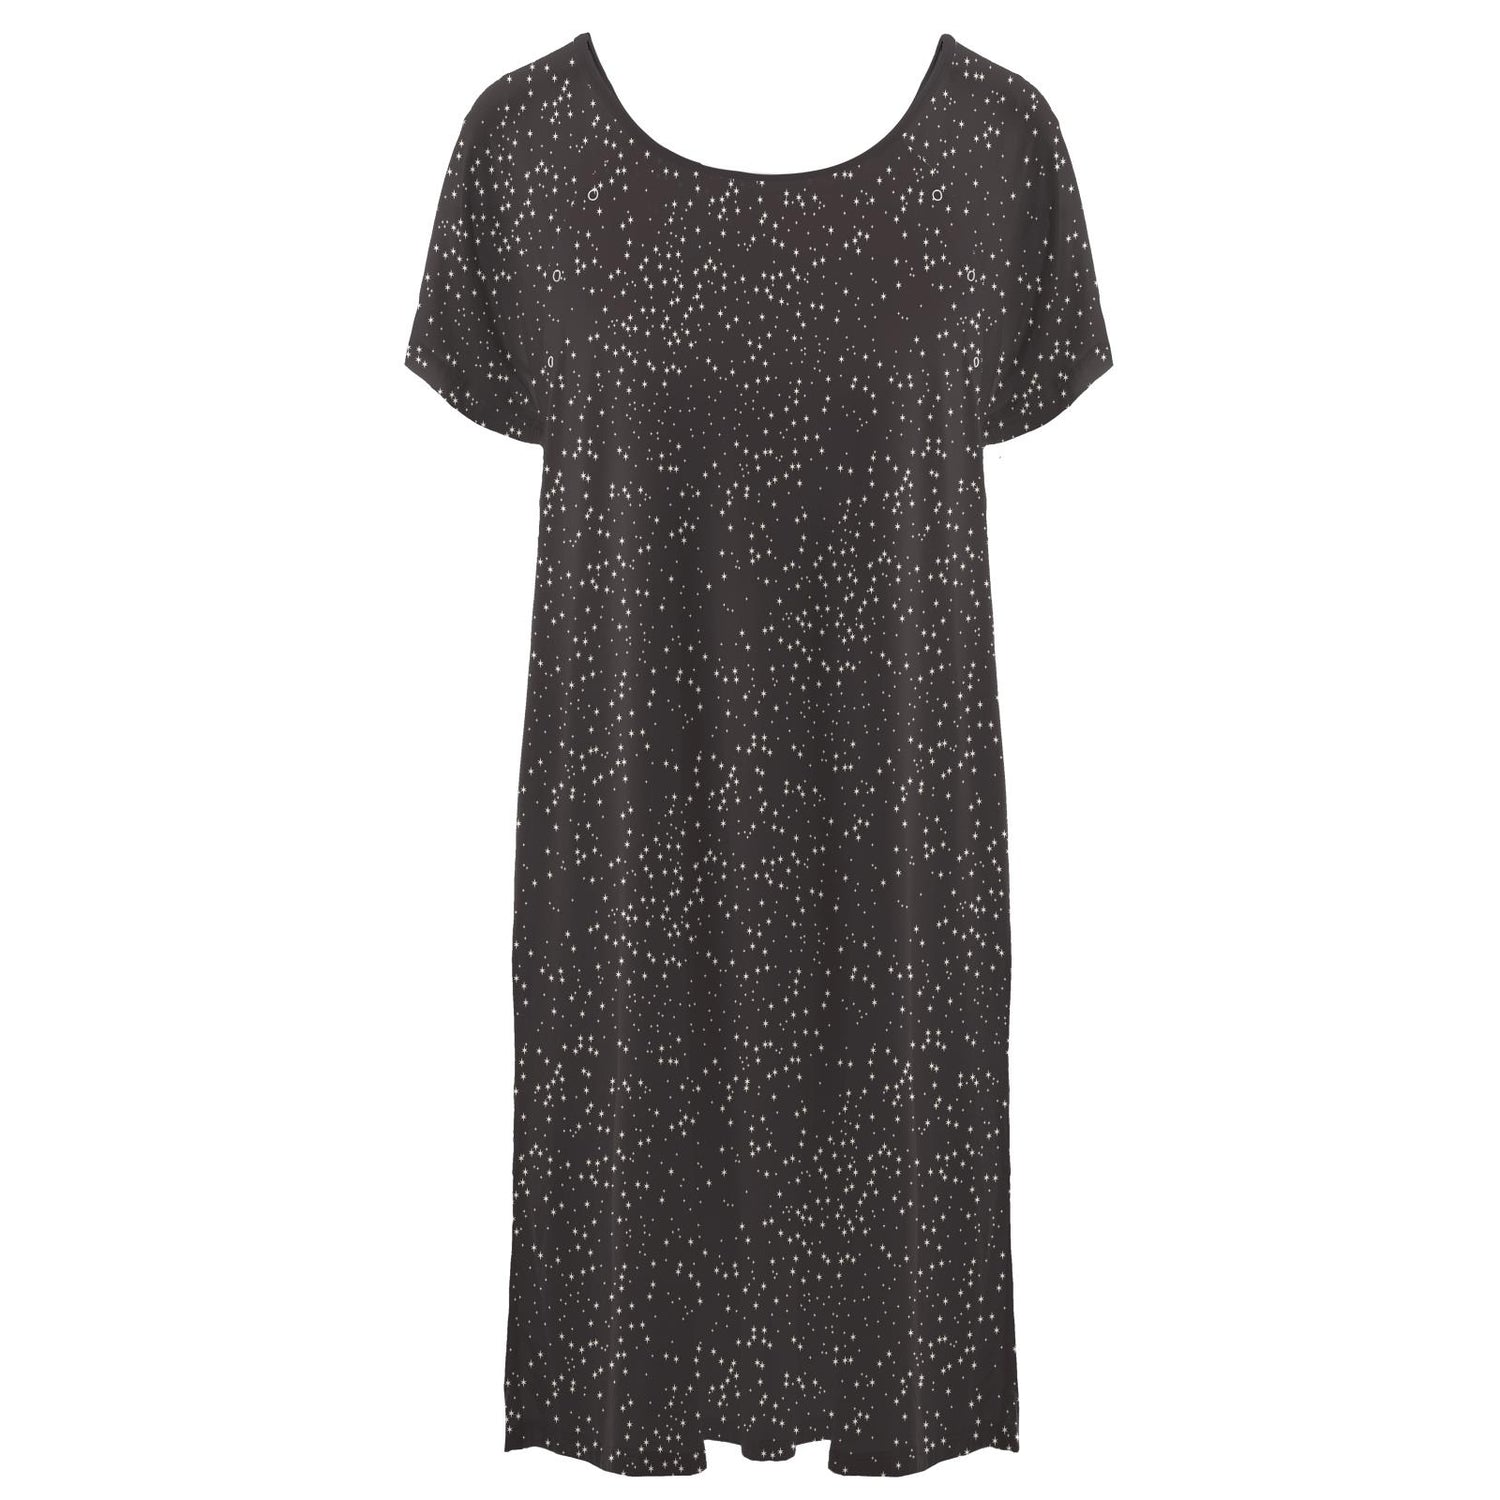 Women's Print Hospital Gown in Midnight Constellations